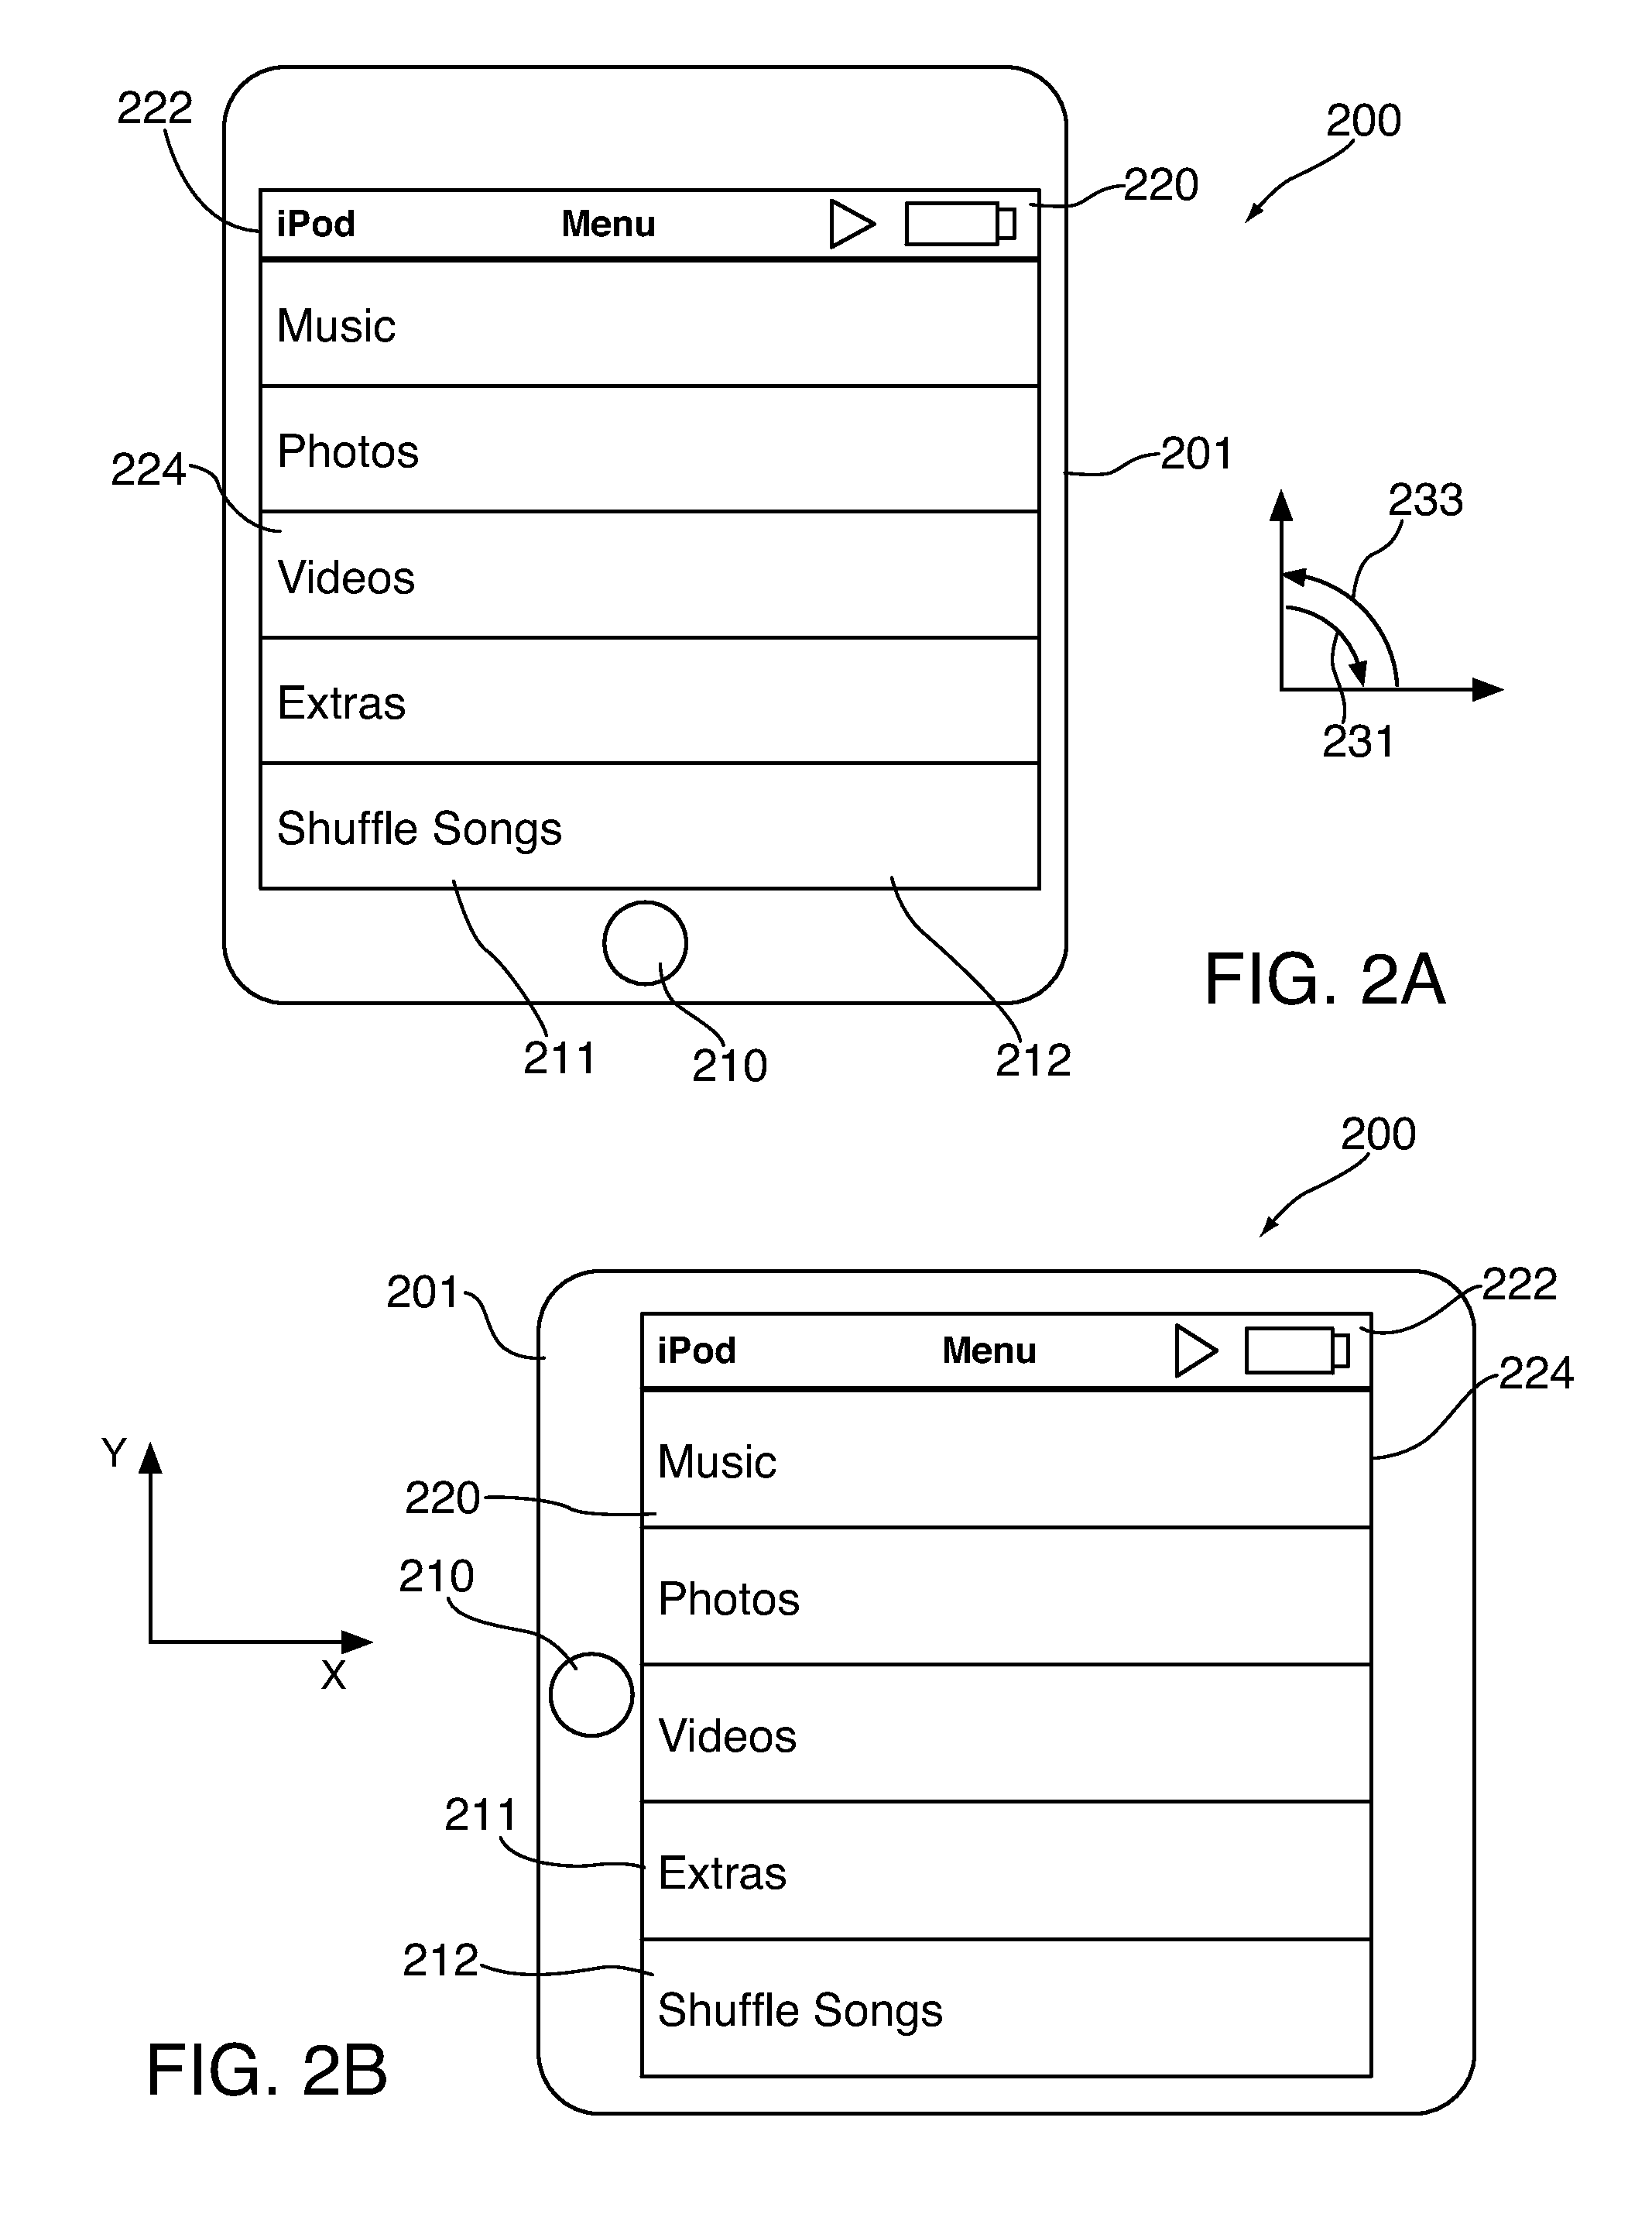 Systems, methods, and computer-readable media for presenting visual content with a consistent orientation